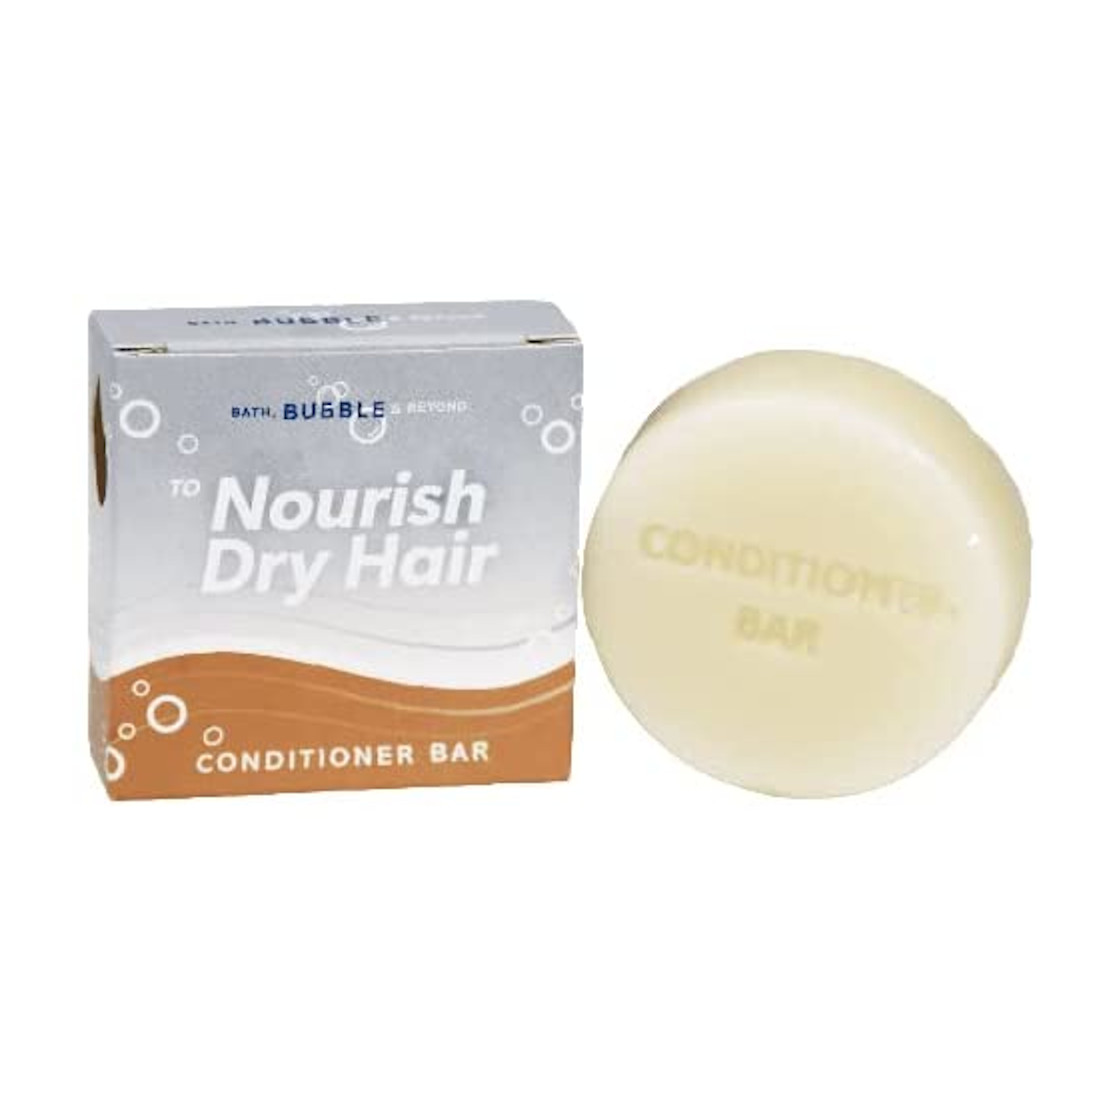 Bath Bubble and Beyond Nourish Dry Hair Conditioner Bar